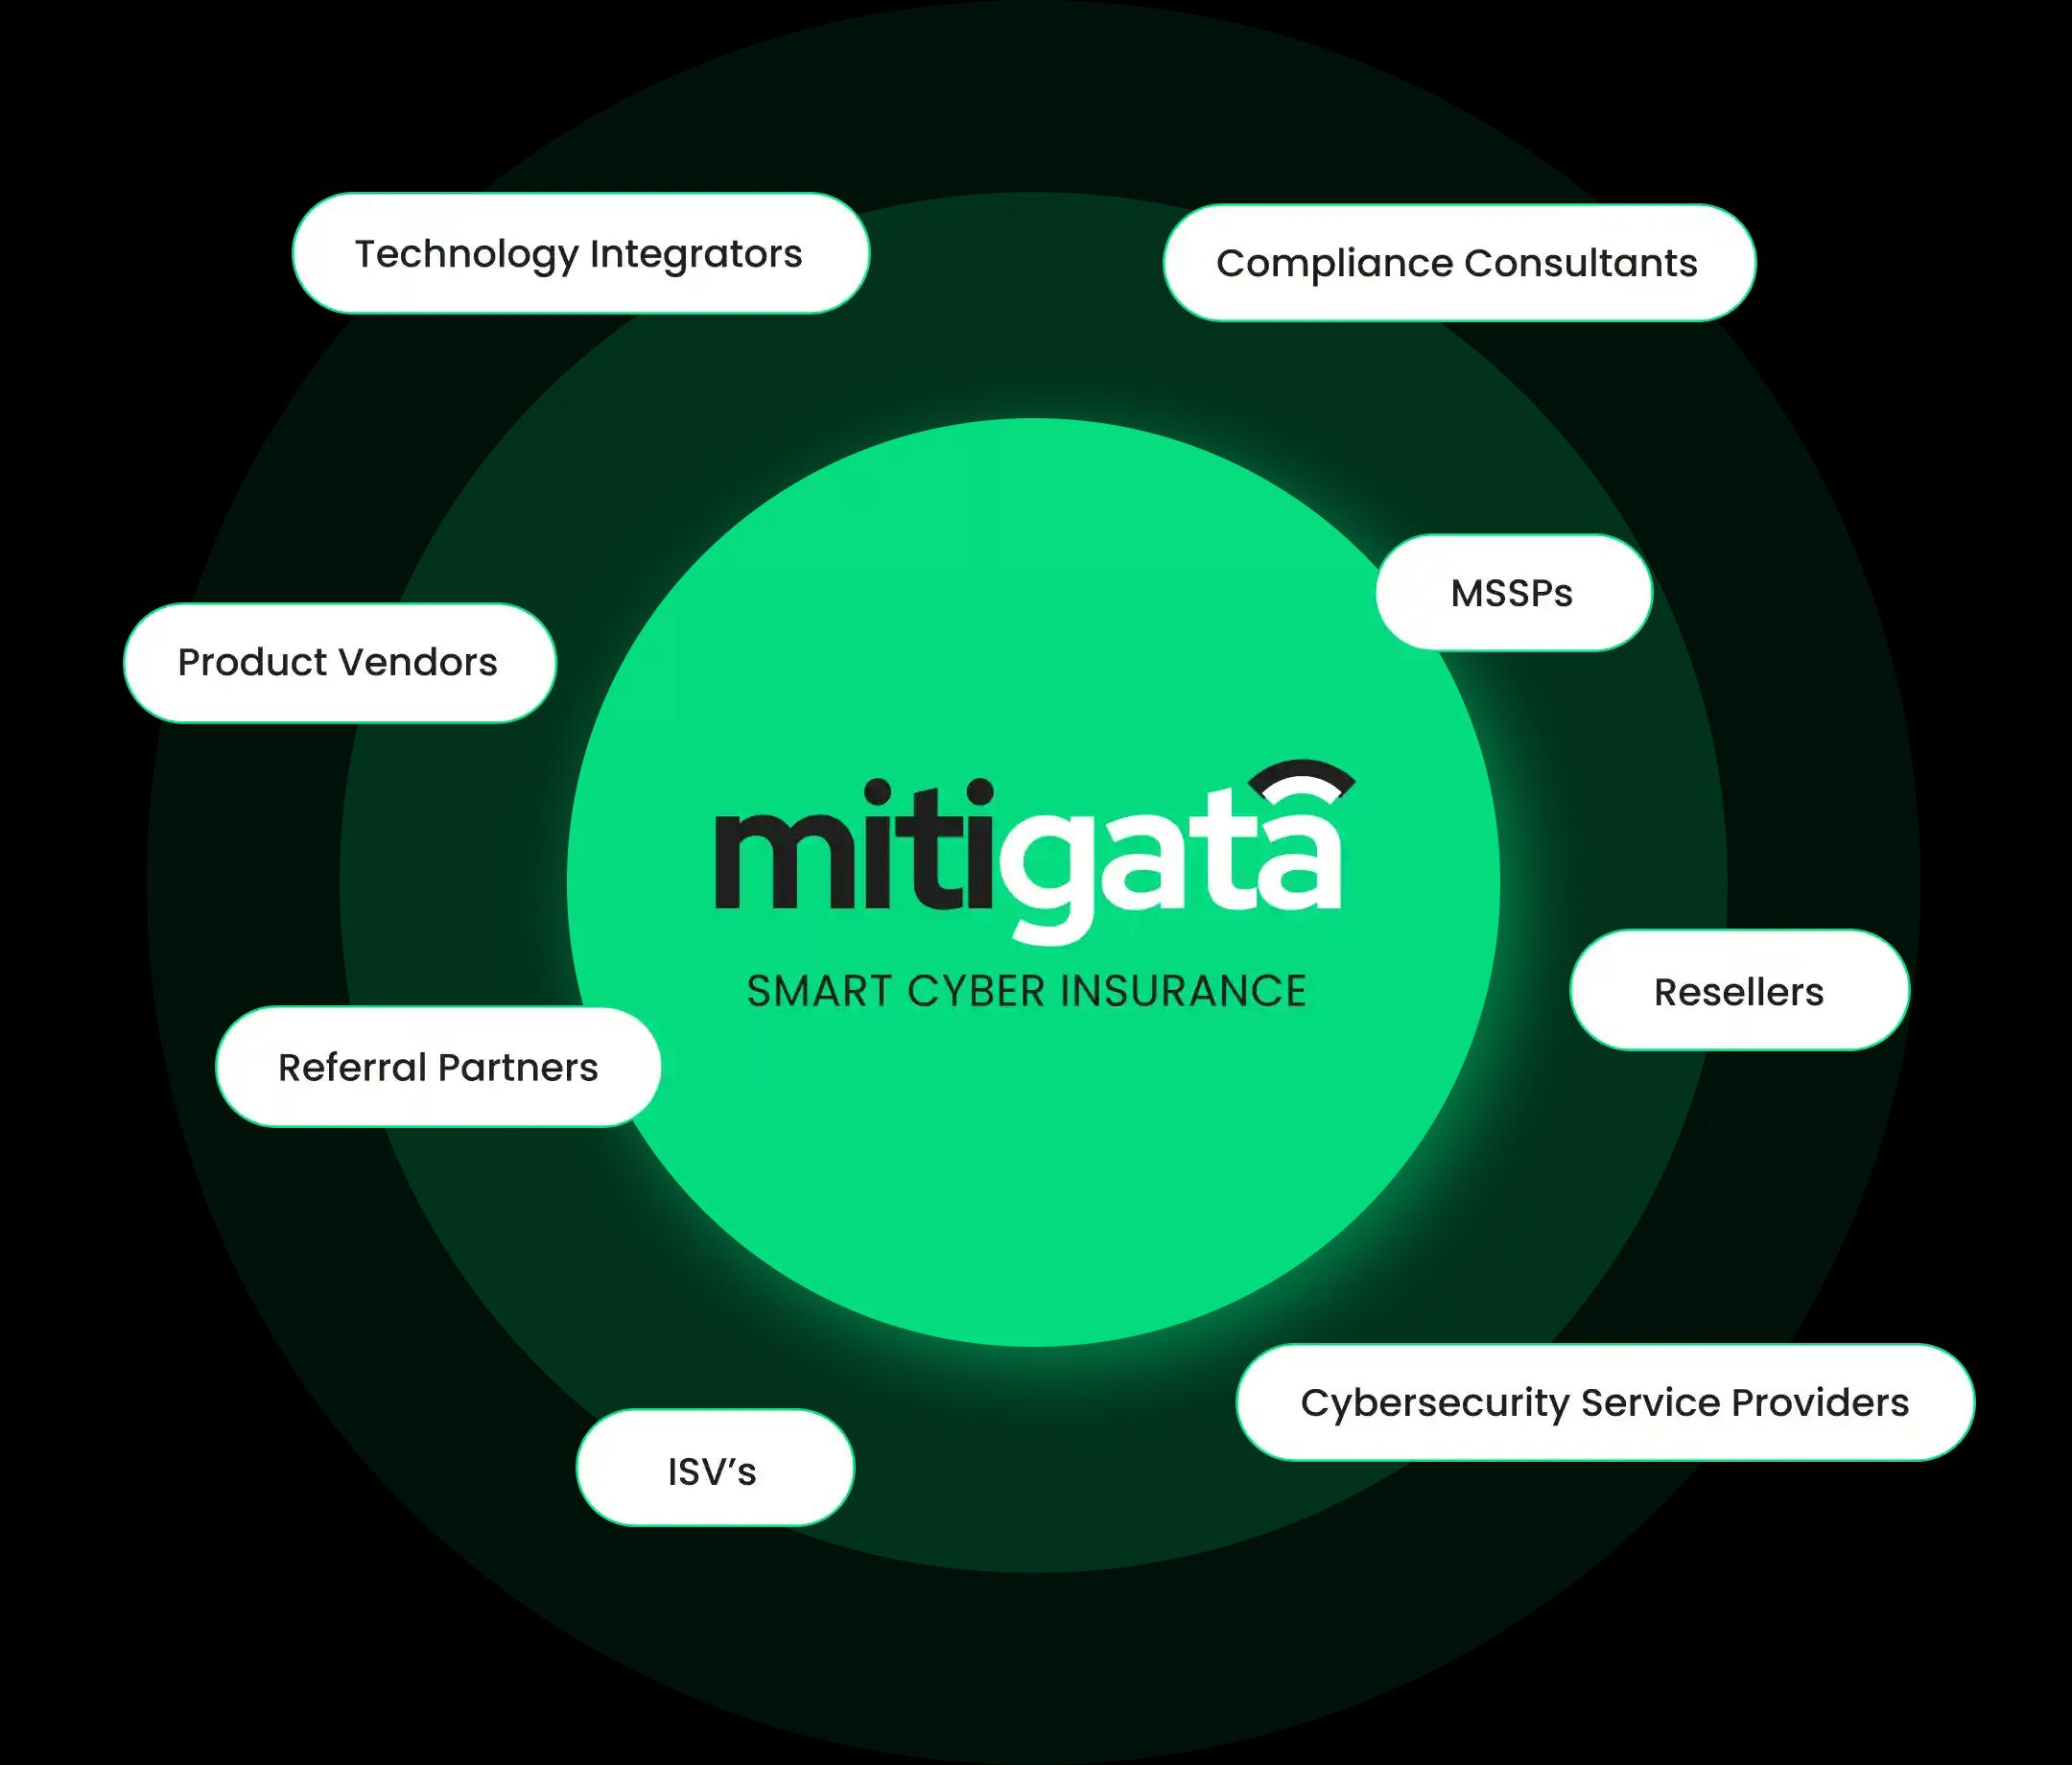 A diagram highlighting the Mitigata Smart Cyber Insurance ecosystem, with various partner types such as Technology Integrators, Compliance Consultants, and MSSPs orbiting around the Mitigata brand.